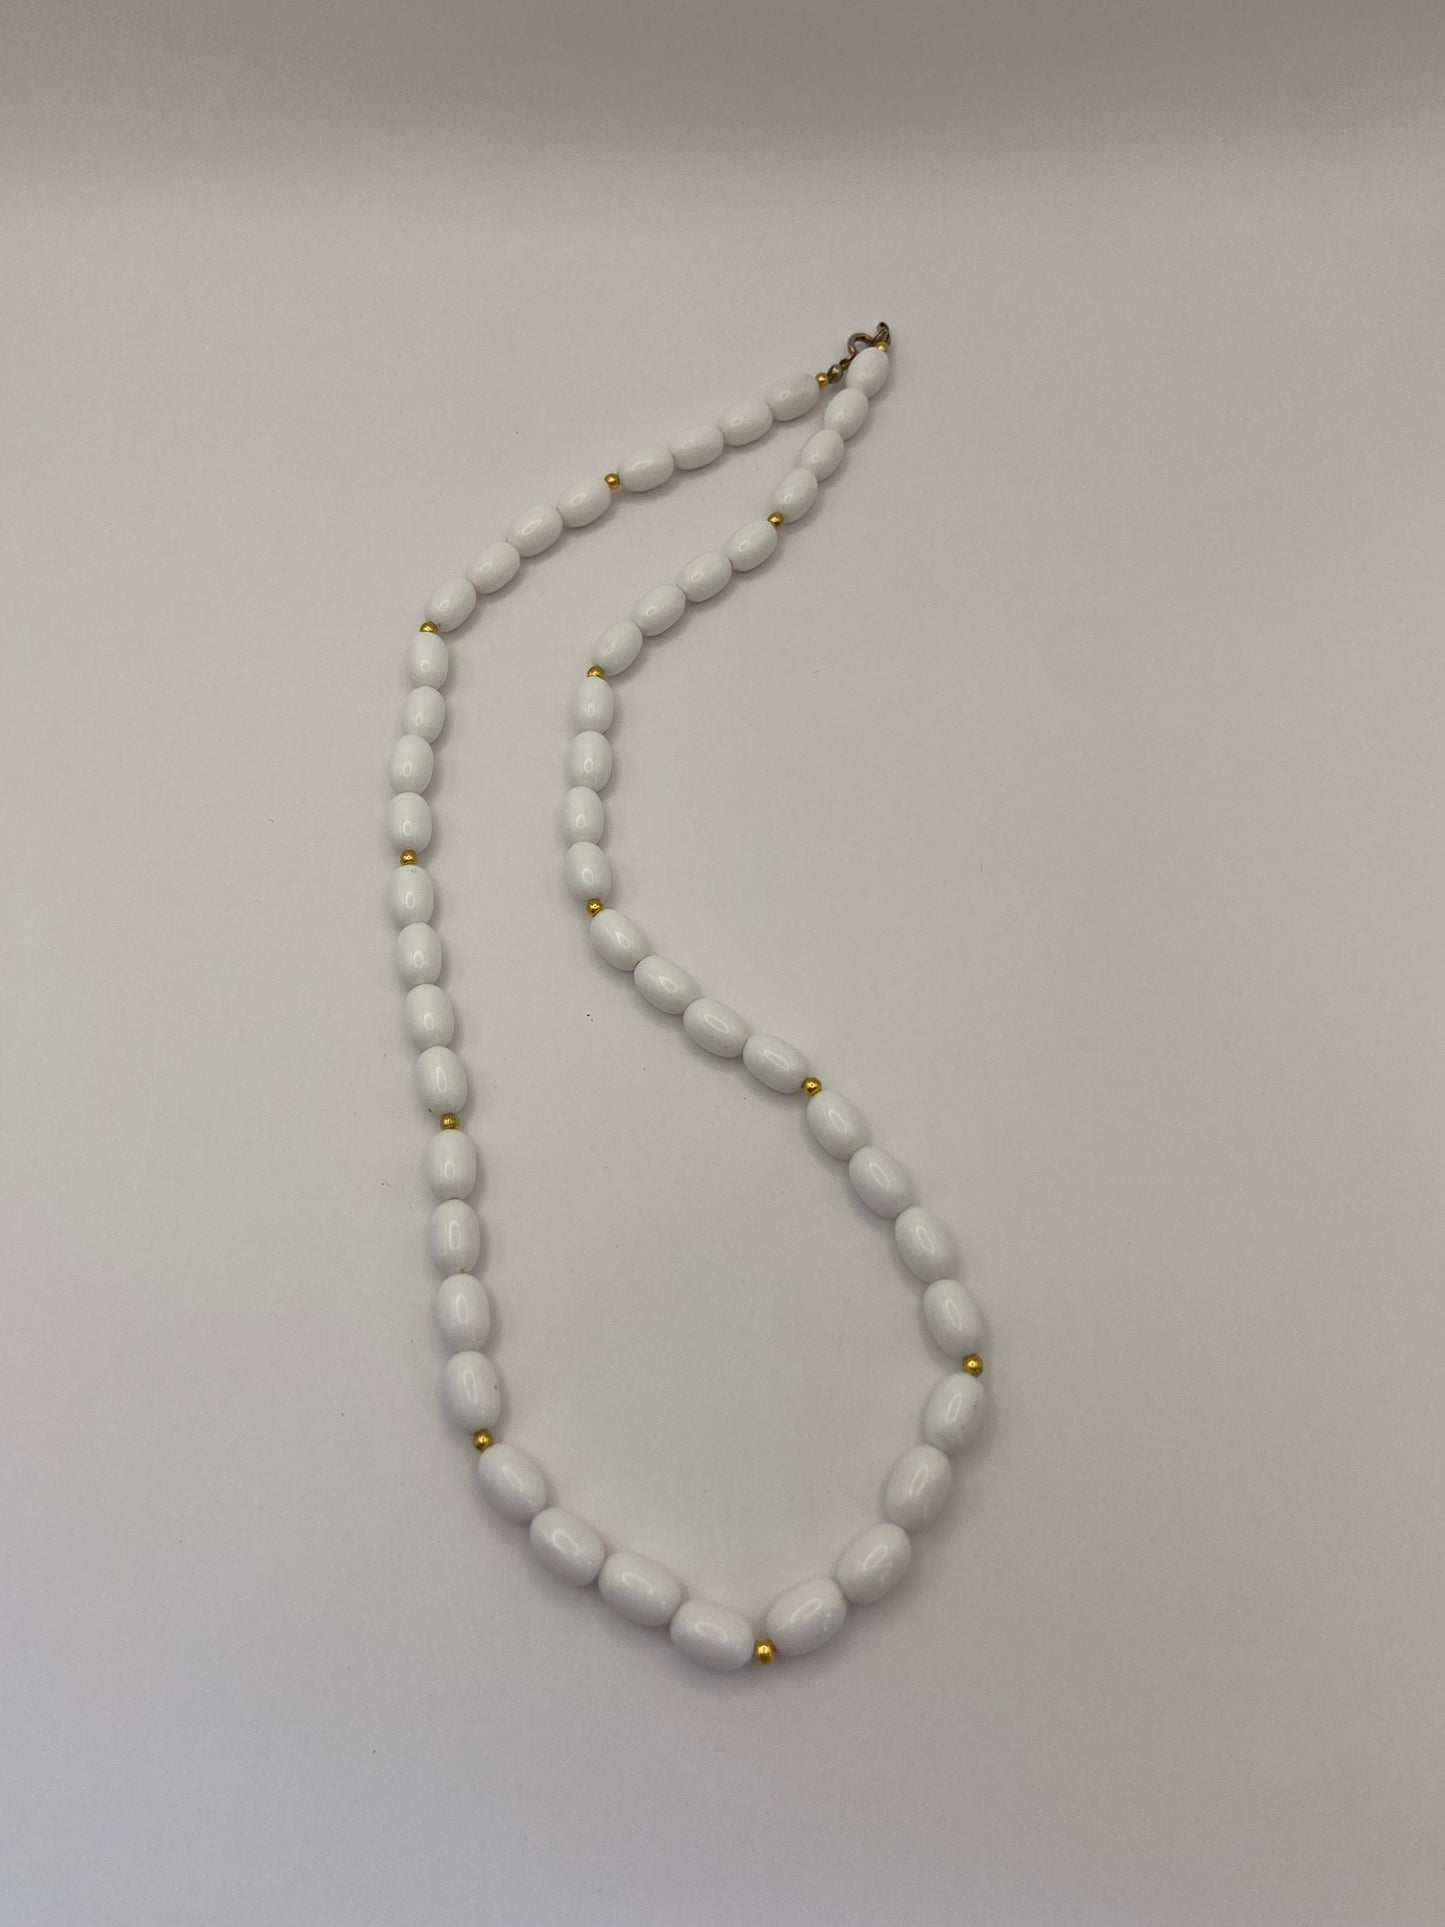 White Bead with Gold Accents Necklace